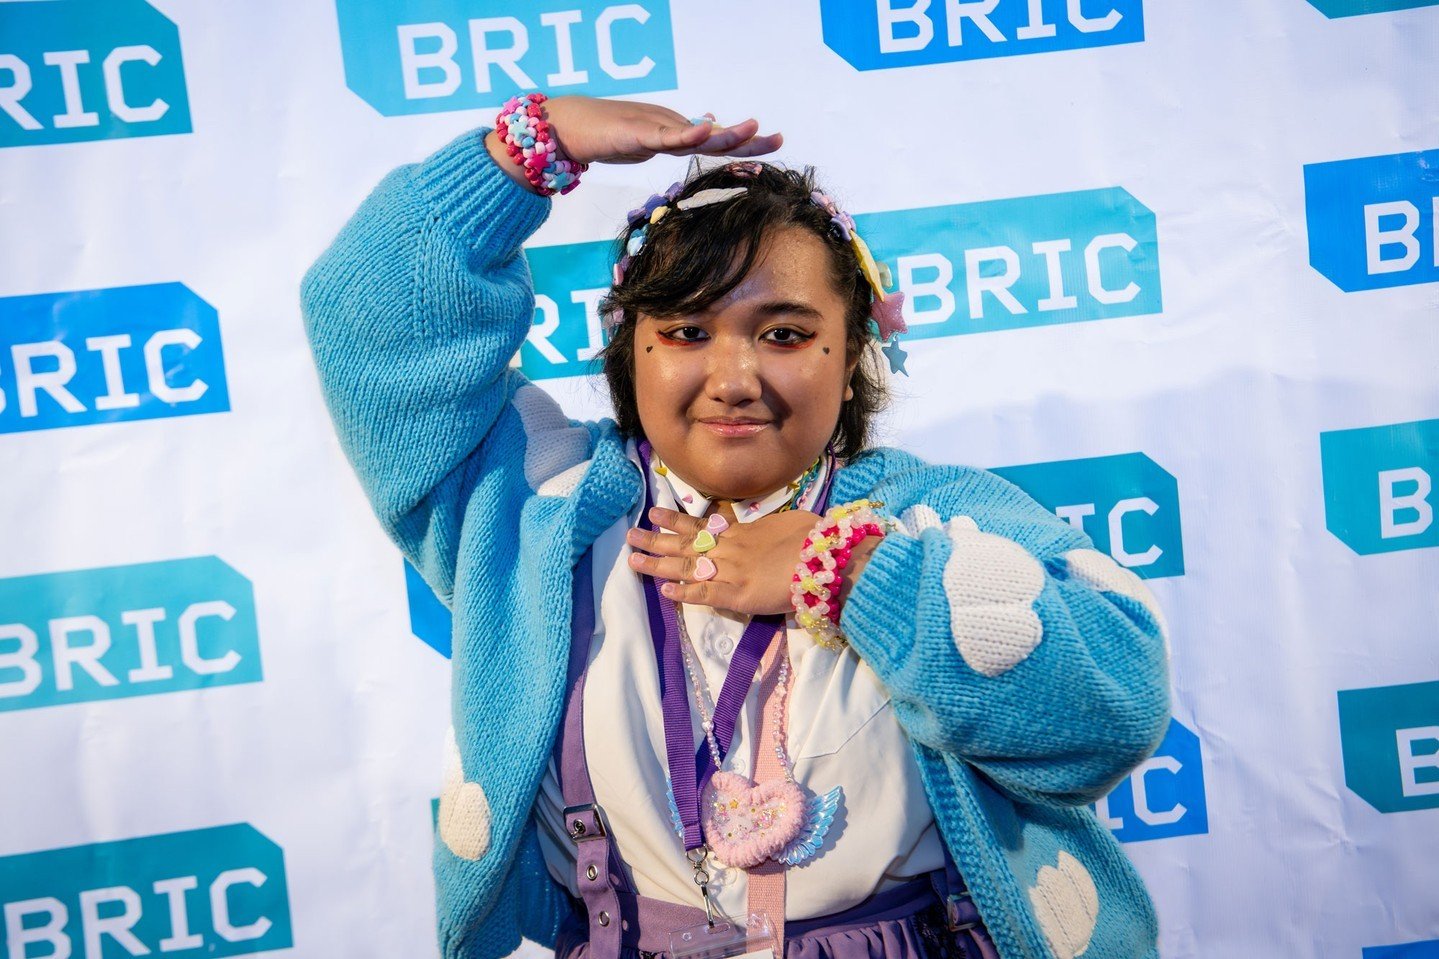 From our friends at BRIC to help us kick off Arts Month! #ArtsMonthMayDBAA #ArtsMonth @downtownbrooklynartsalliance

Are you ready? The youth are taking over @bricbrooklyn&rsquo;s BRIC House on May 30th 📣

The works of more than 150 NYC students wil